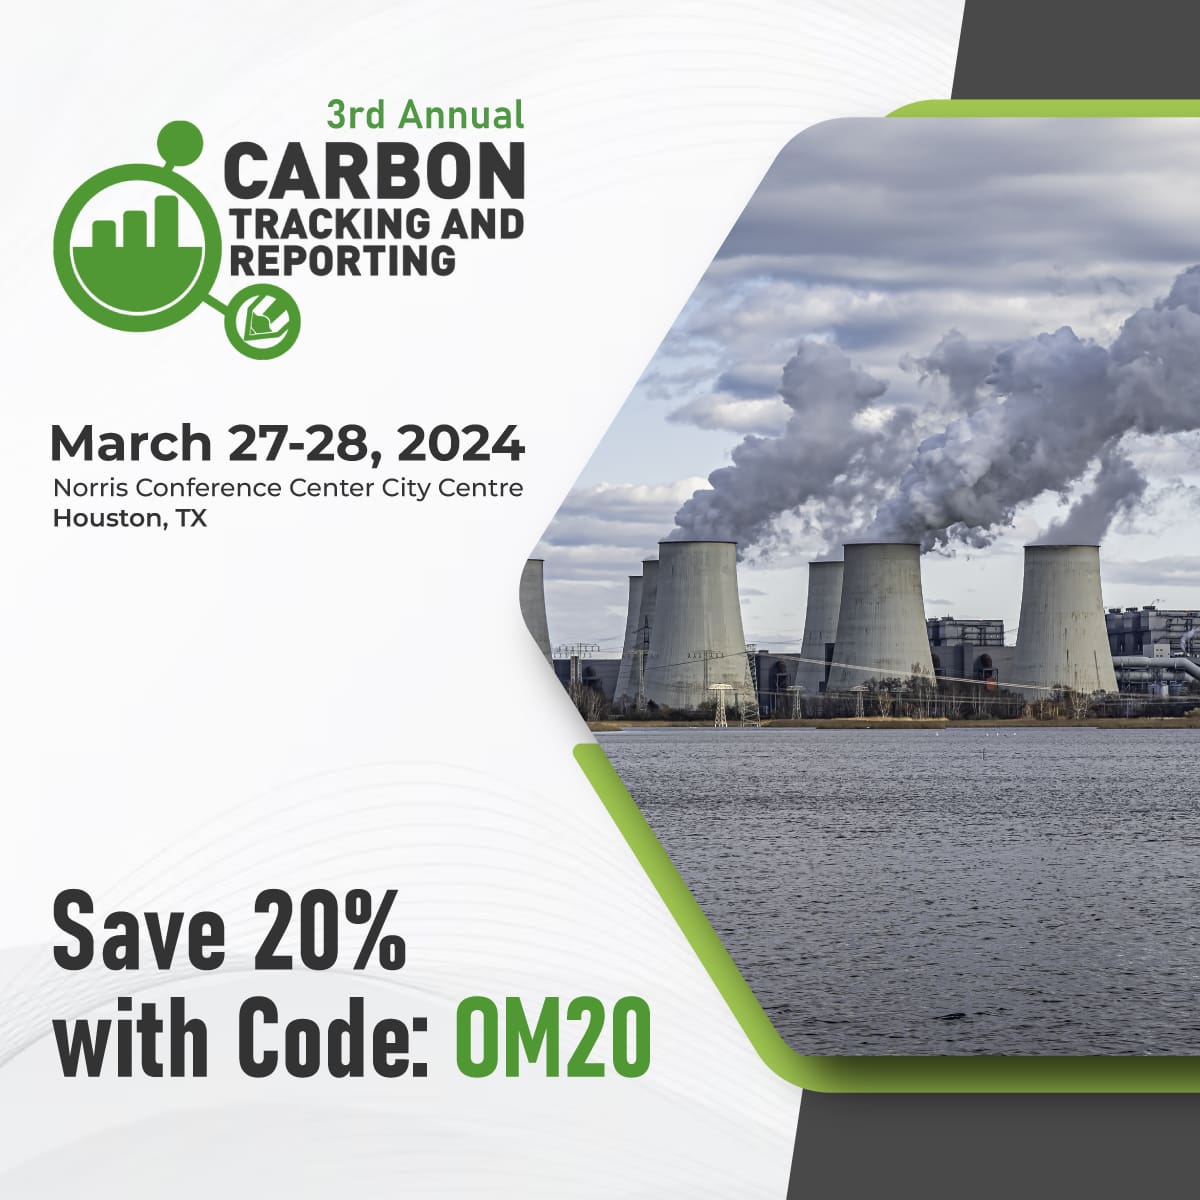 3rd Annual Carbon Tracking and Reporting Conference